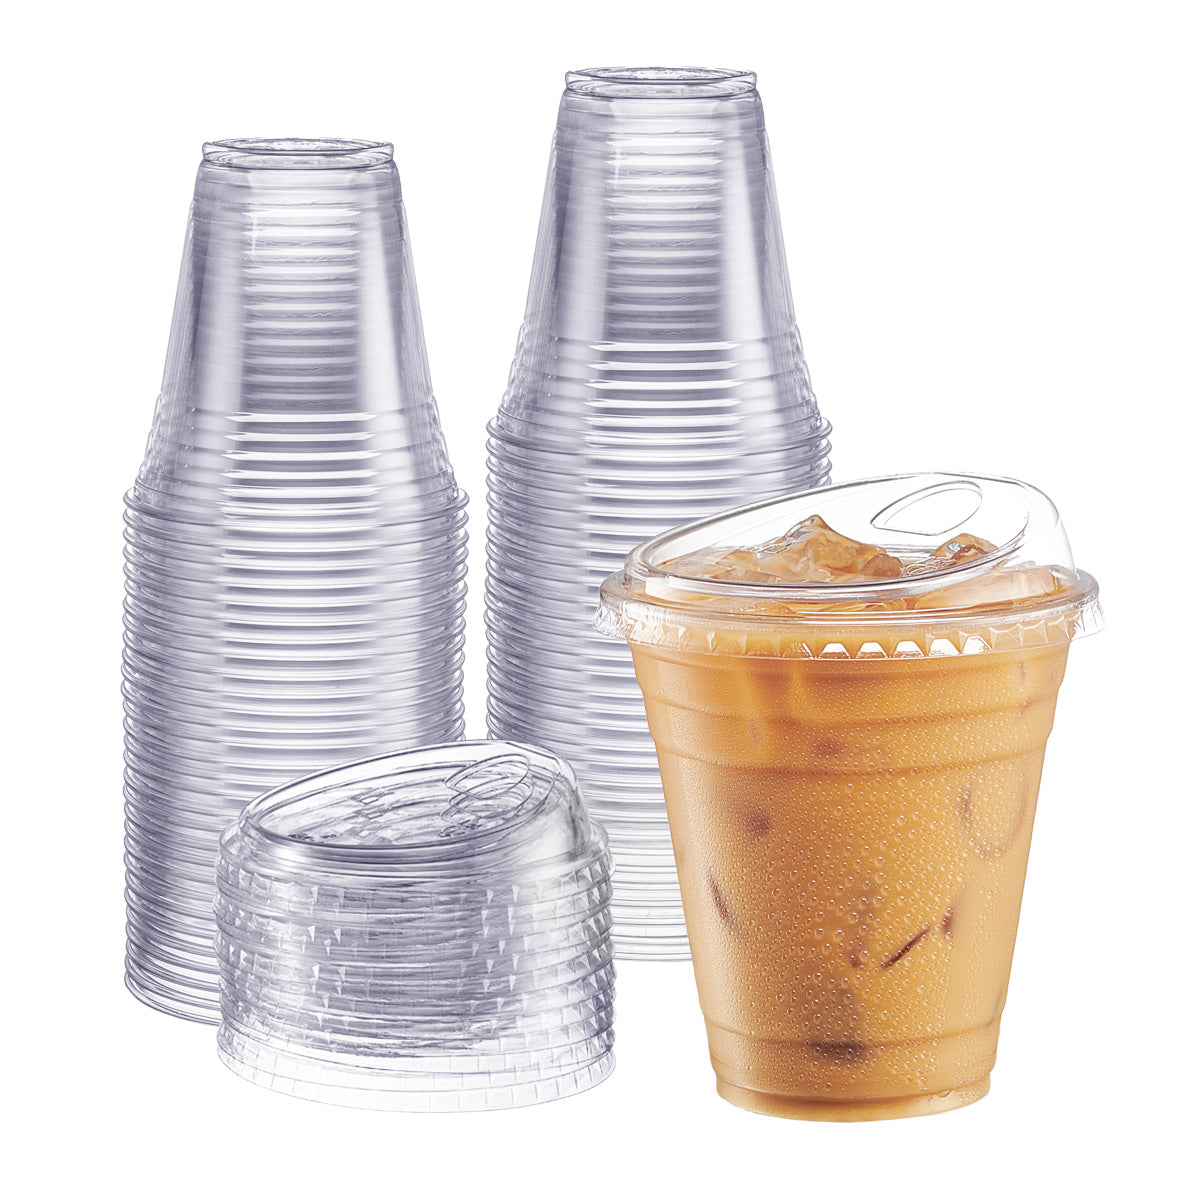 16 oz. Clear Cups with Strawless Sip-Lids, 50 Sets PET Crystal